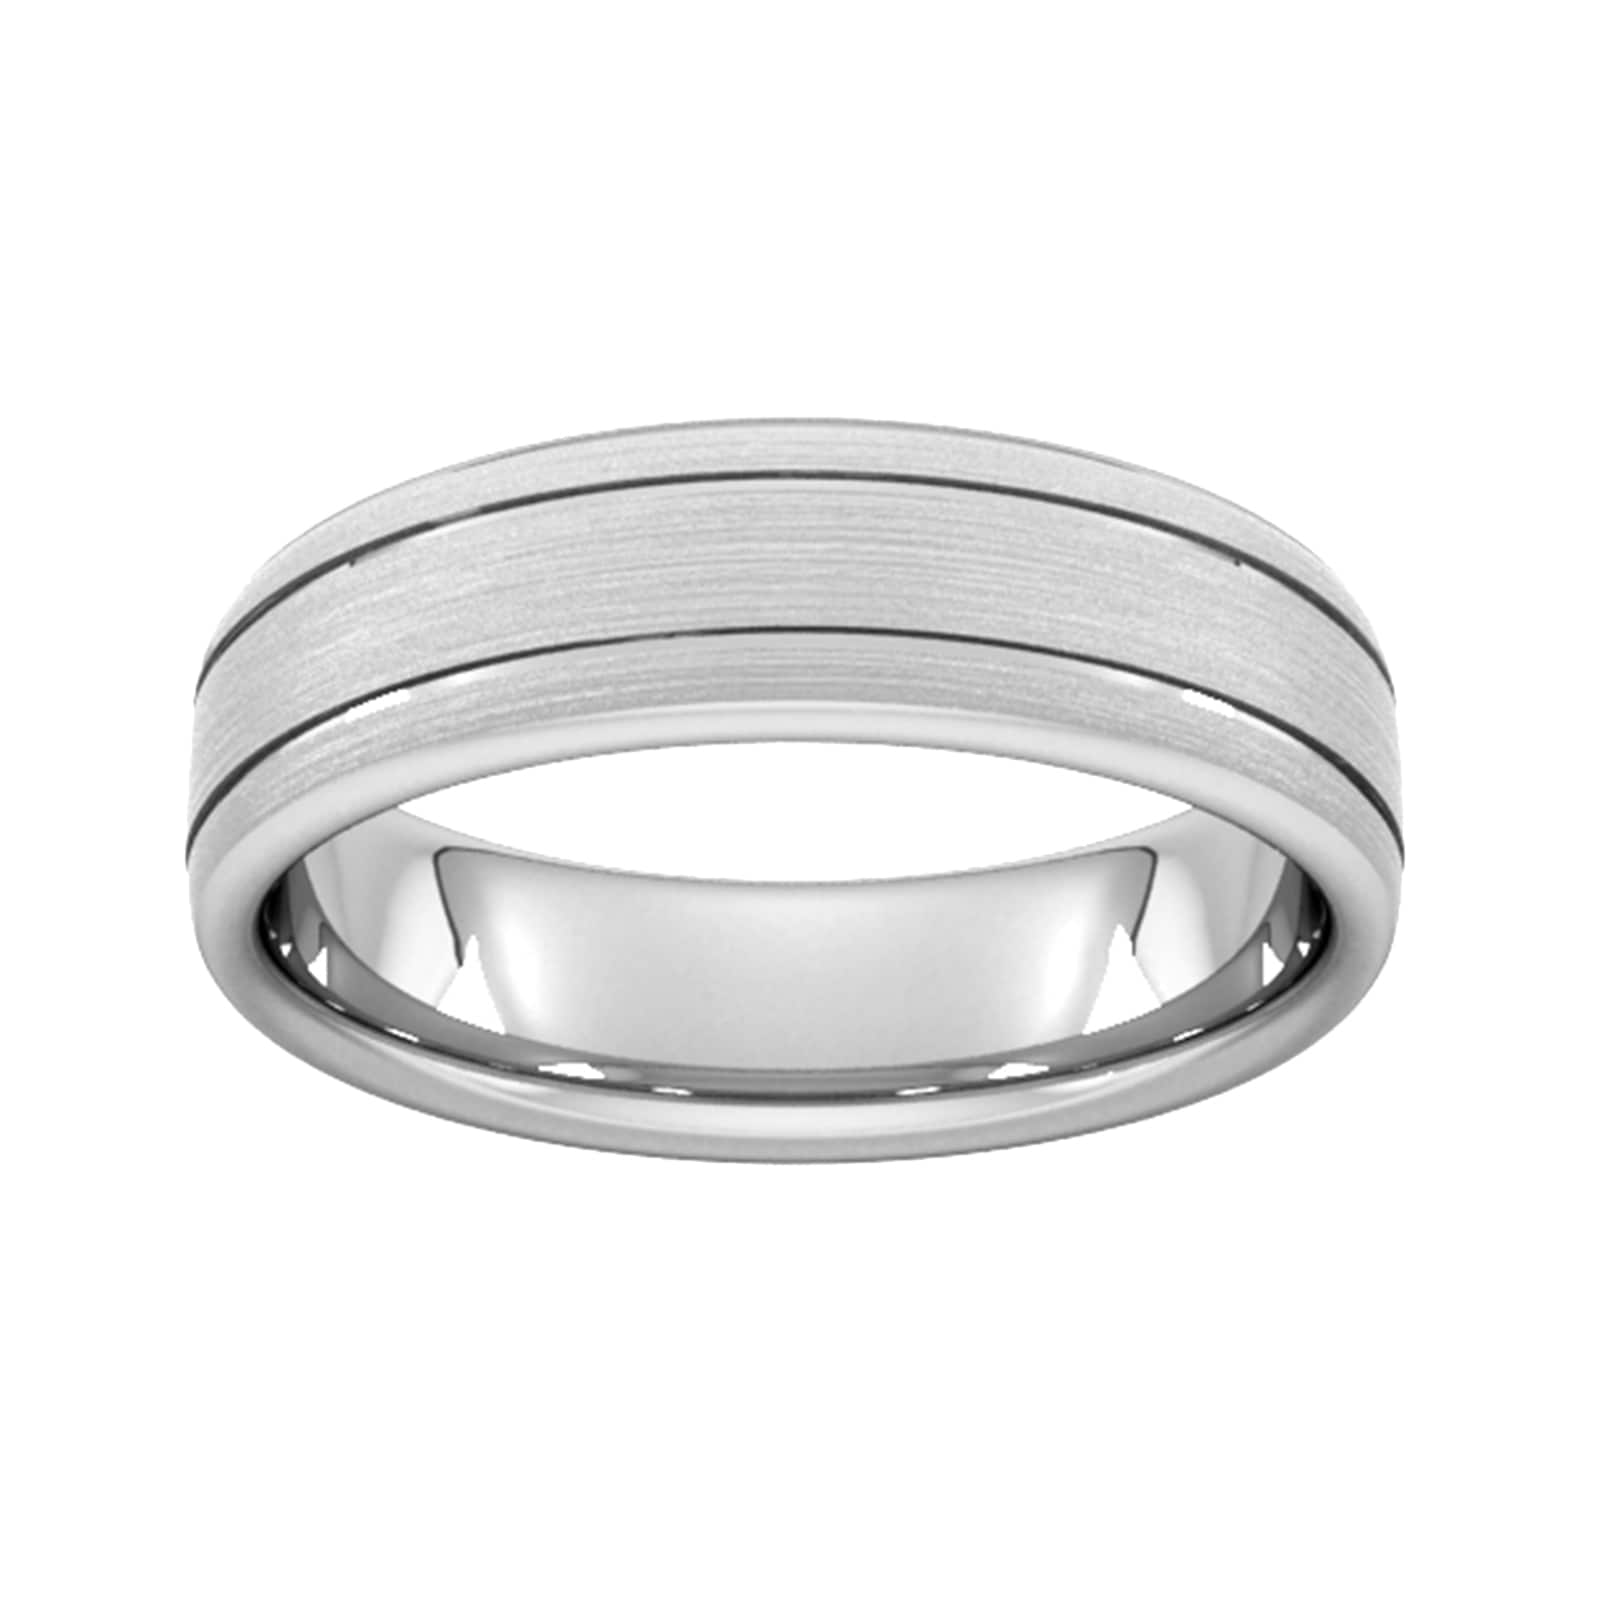 6mm D Shape Heavy Matt Finish With Double Grooves Wedding Ring In 950 Palladium - Ring Size W